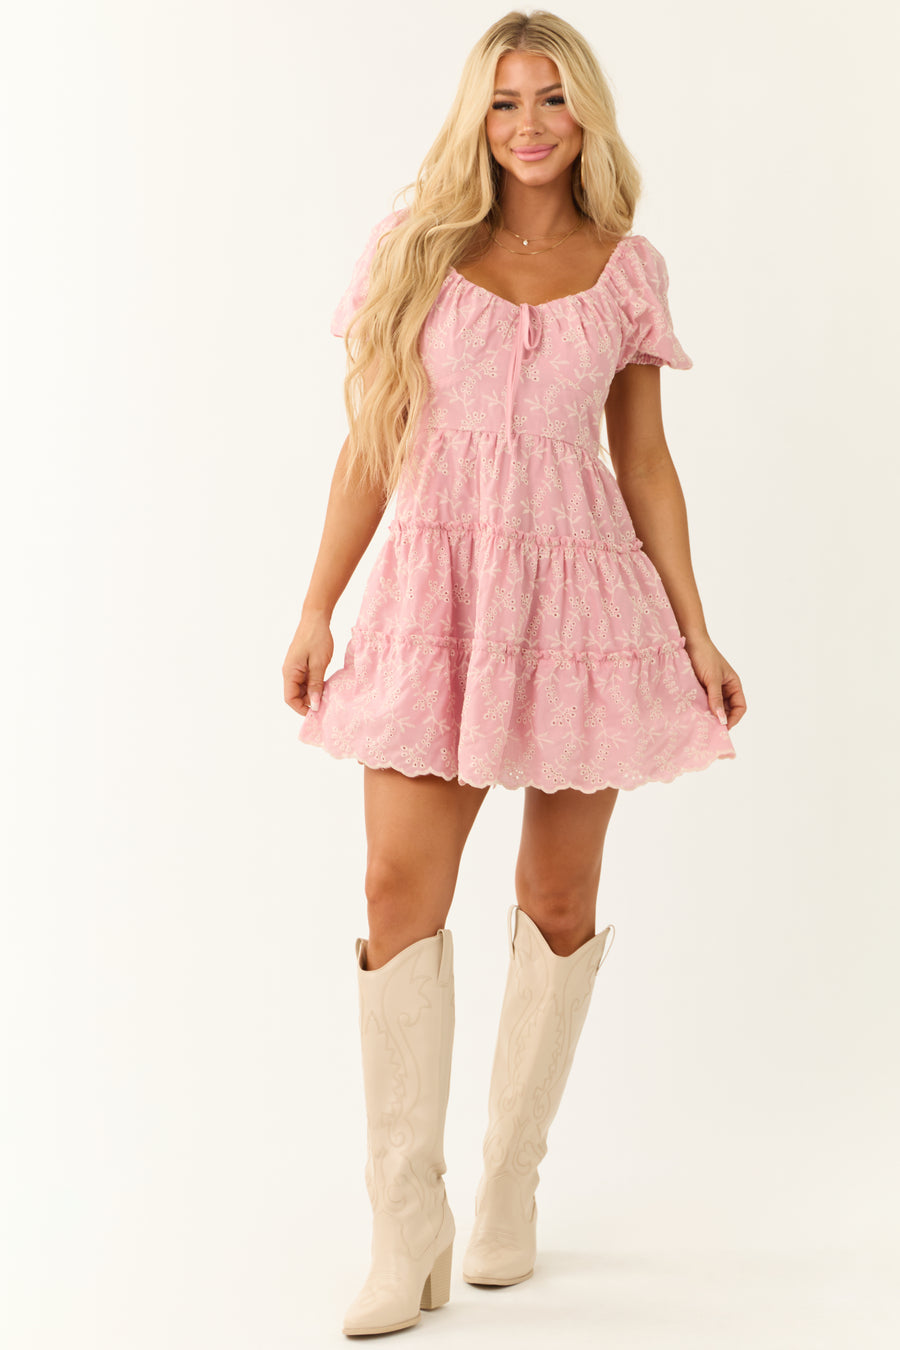 Baby Pink Tiered Eyelet Floral Pattern Mini Dress